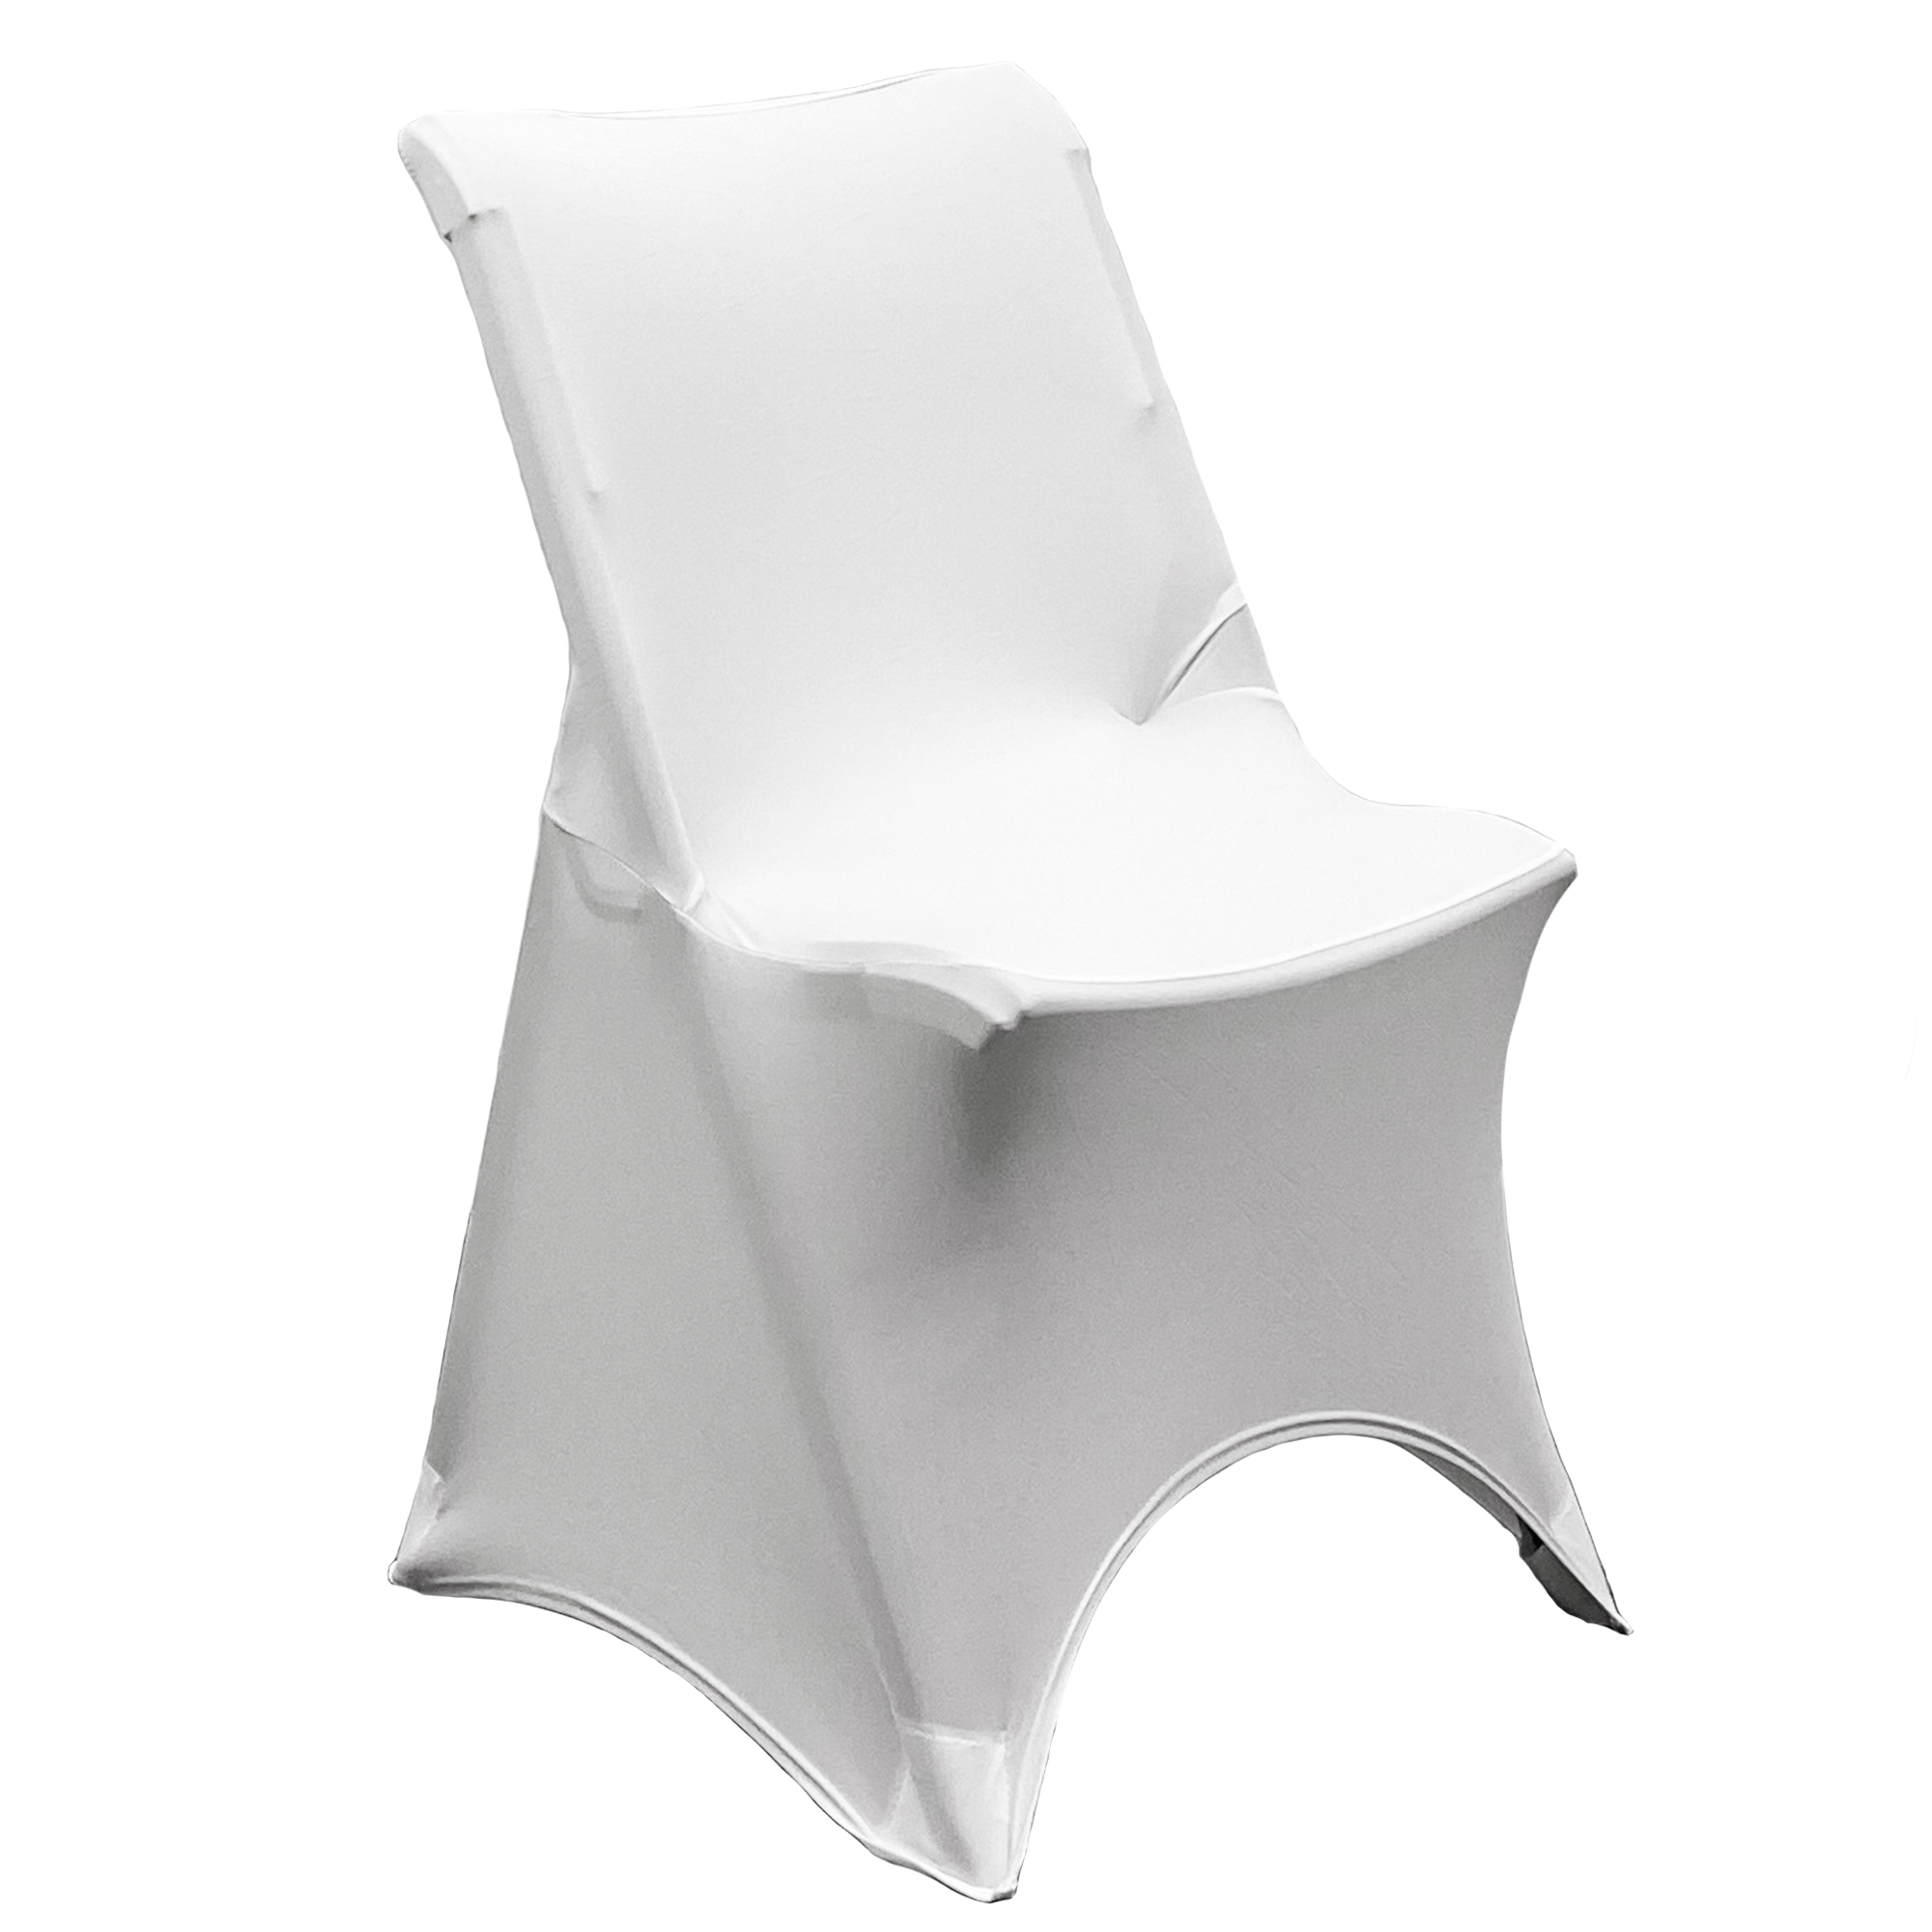 Richland White Spandex Folding Chair Cover Set of 10